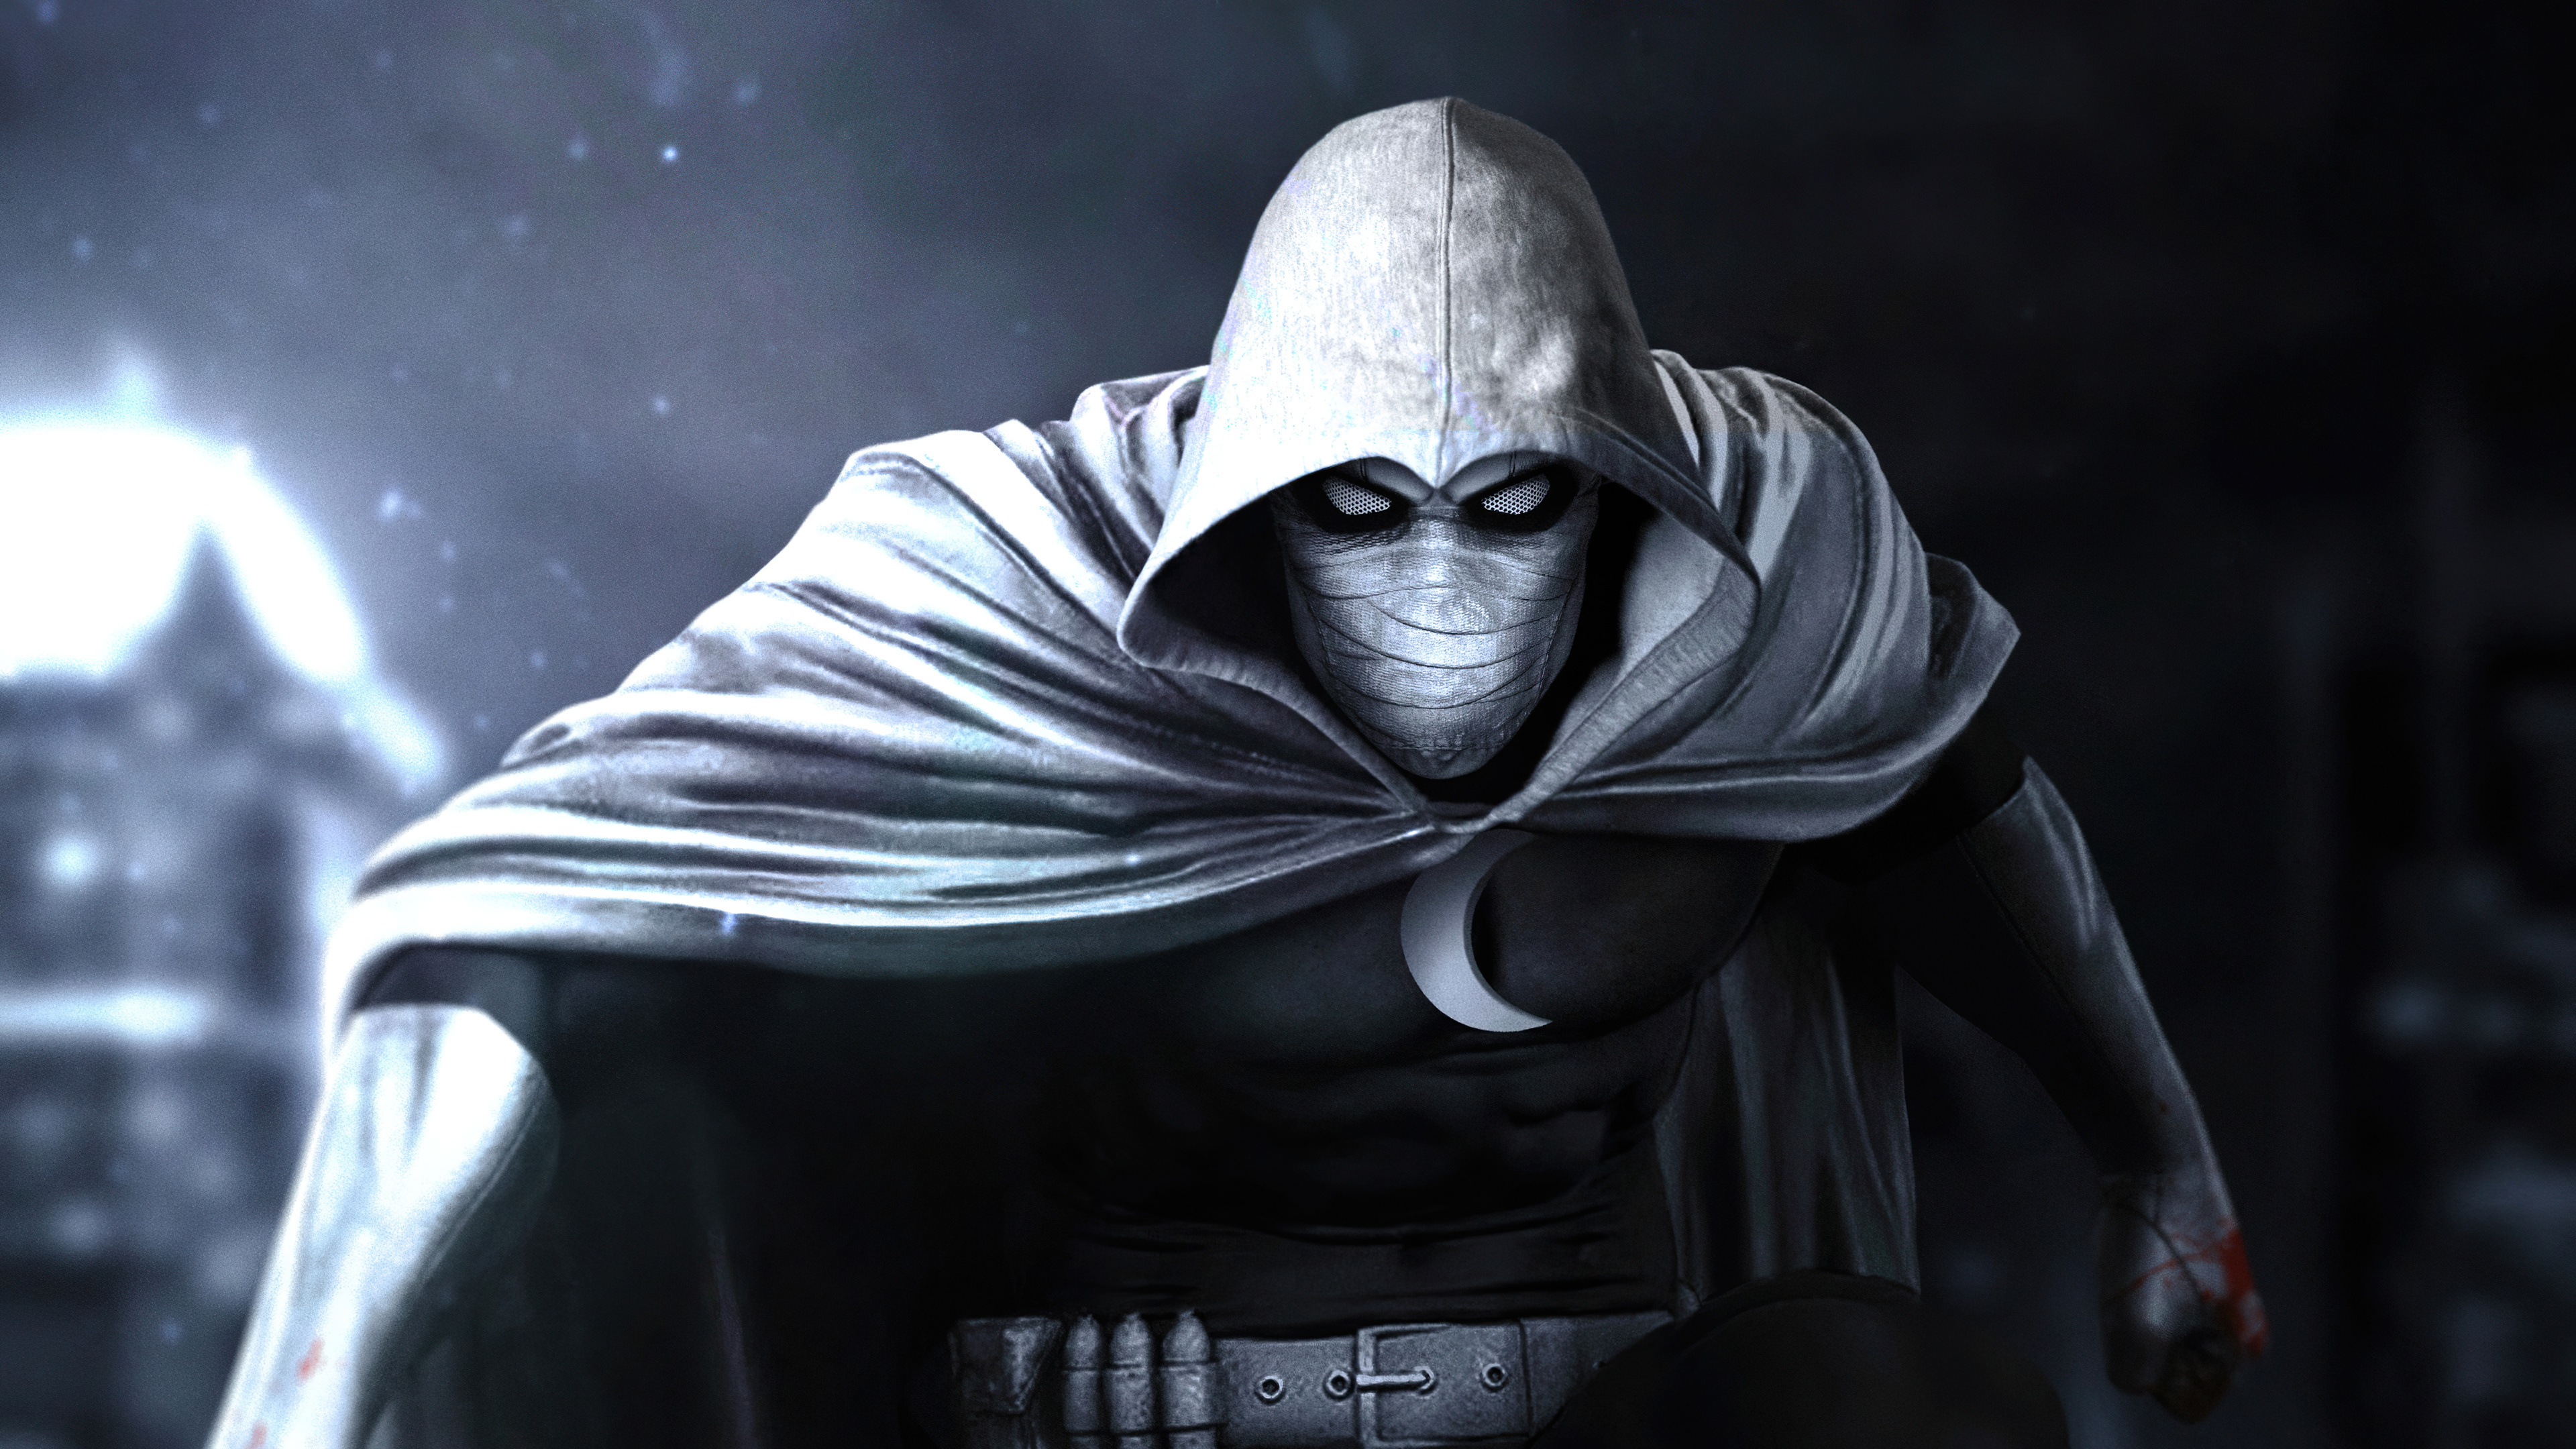 Moon Knight's suit, High-resolution images, 4K wallpapers, Moon Knight's costume, 3840x2160 4K Desktop